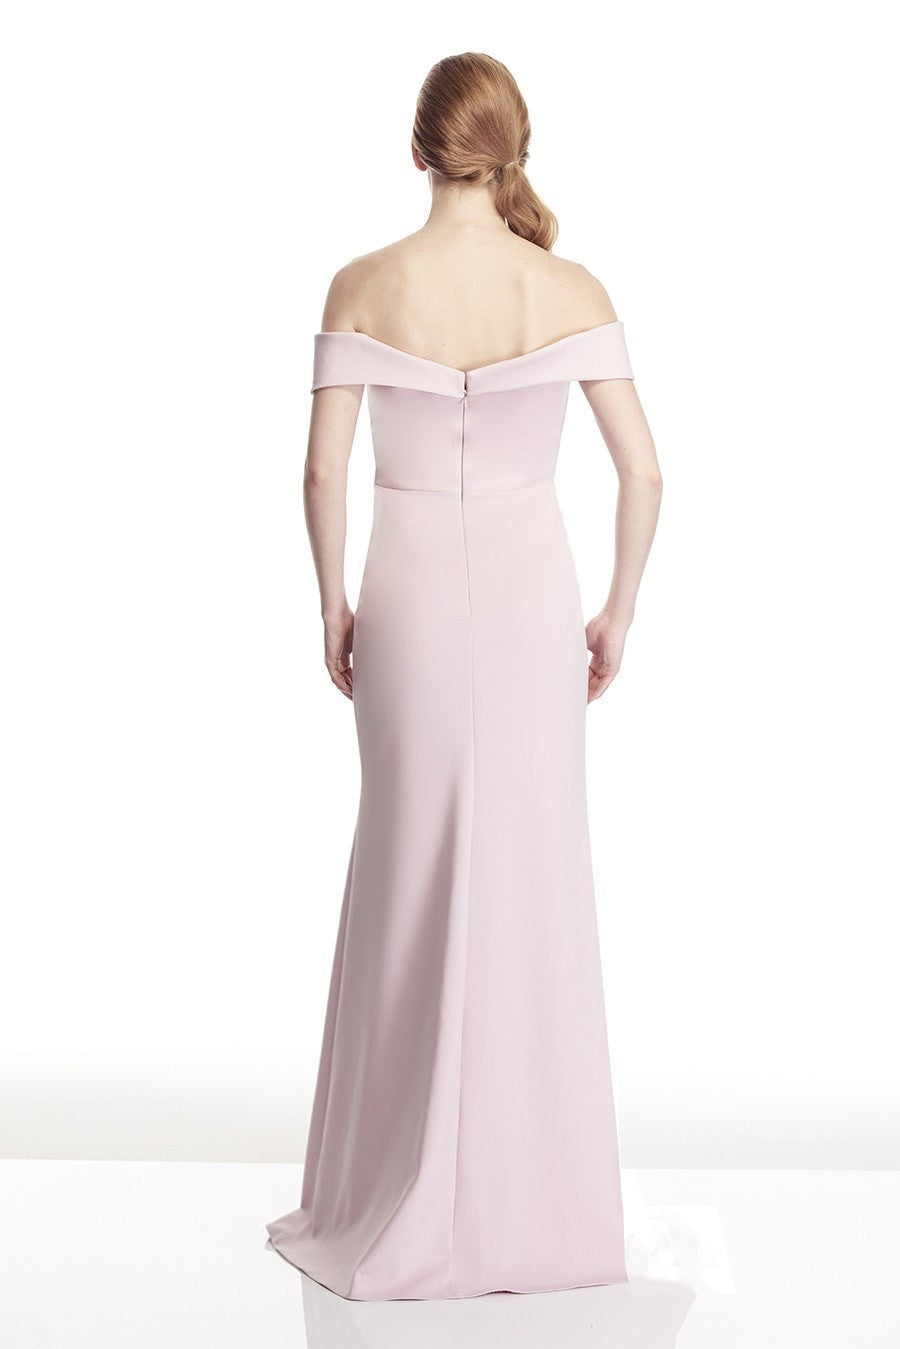 Tinaholy Couture T17115 Tea Rose Pink Off Shoulder Formal Gown Dress Tina Holly Couture$ AfterPay Humm ZipPay LayBuy Sezzle